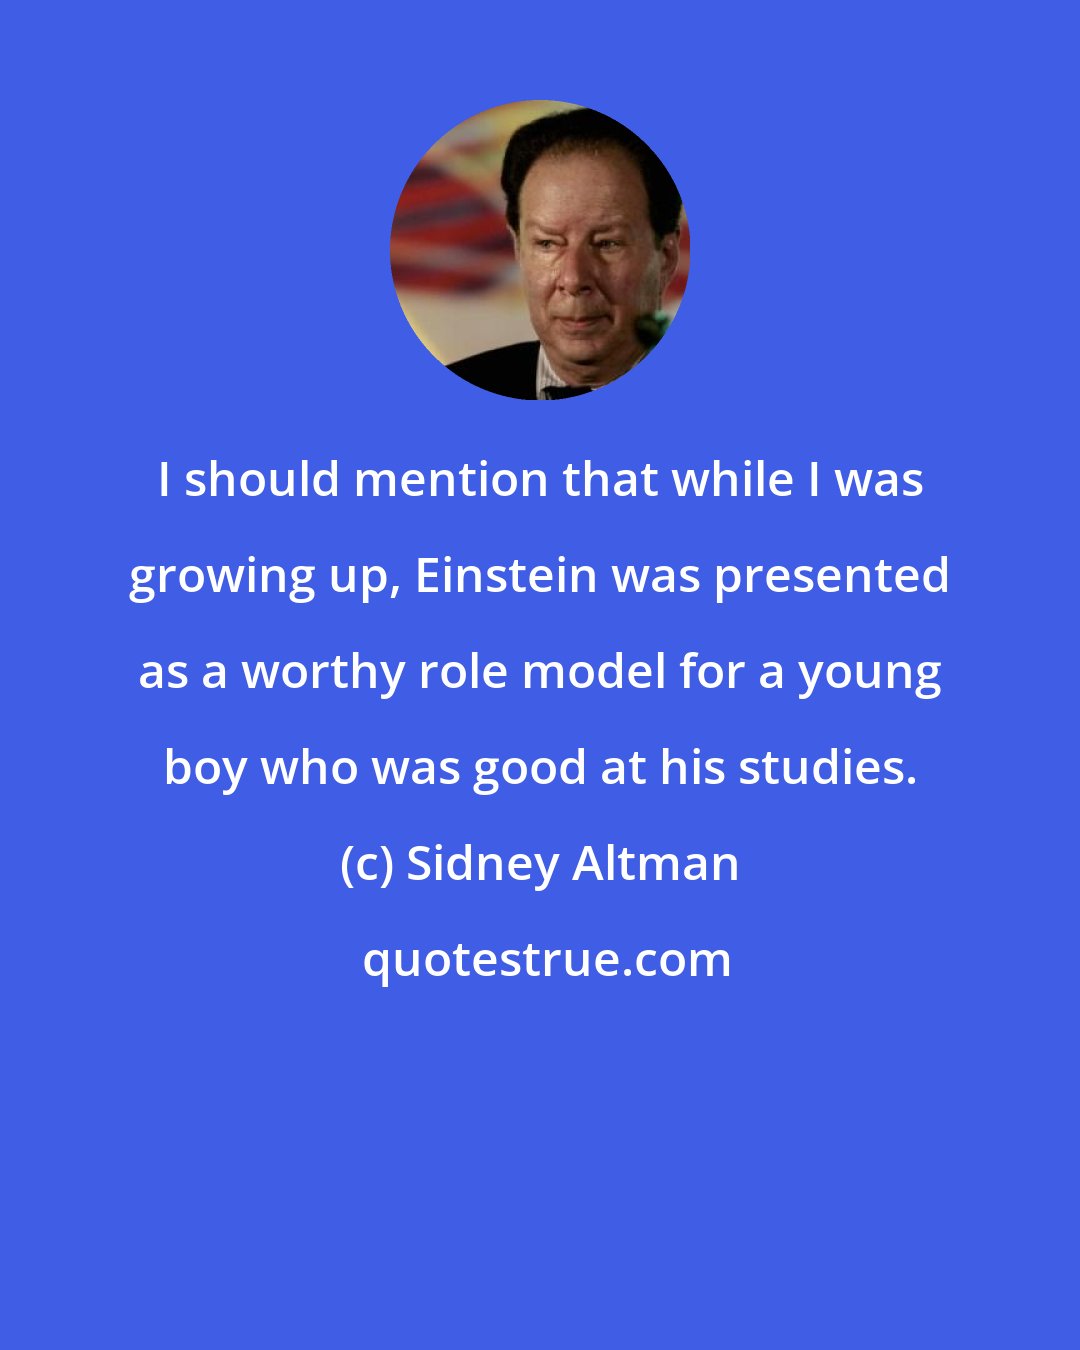 Sidney Altman: I should mention that while I was growing up, Einstein was presented as a worthy role model for a young boy who was good at his studies.